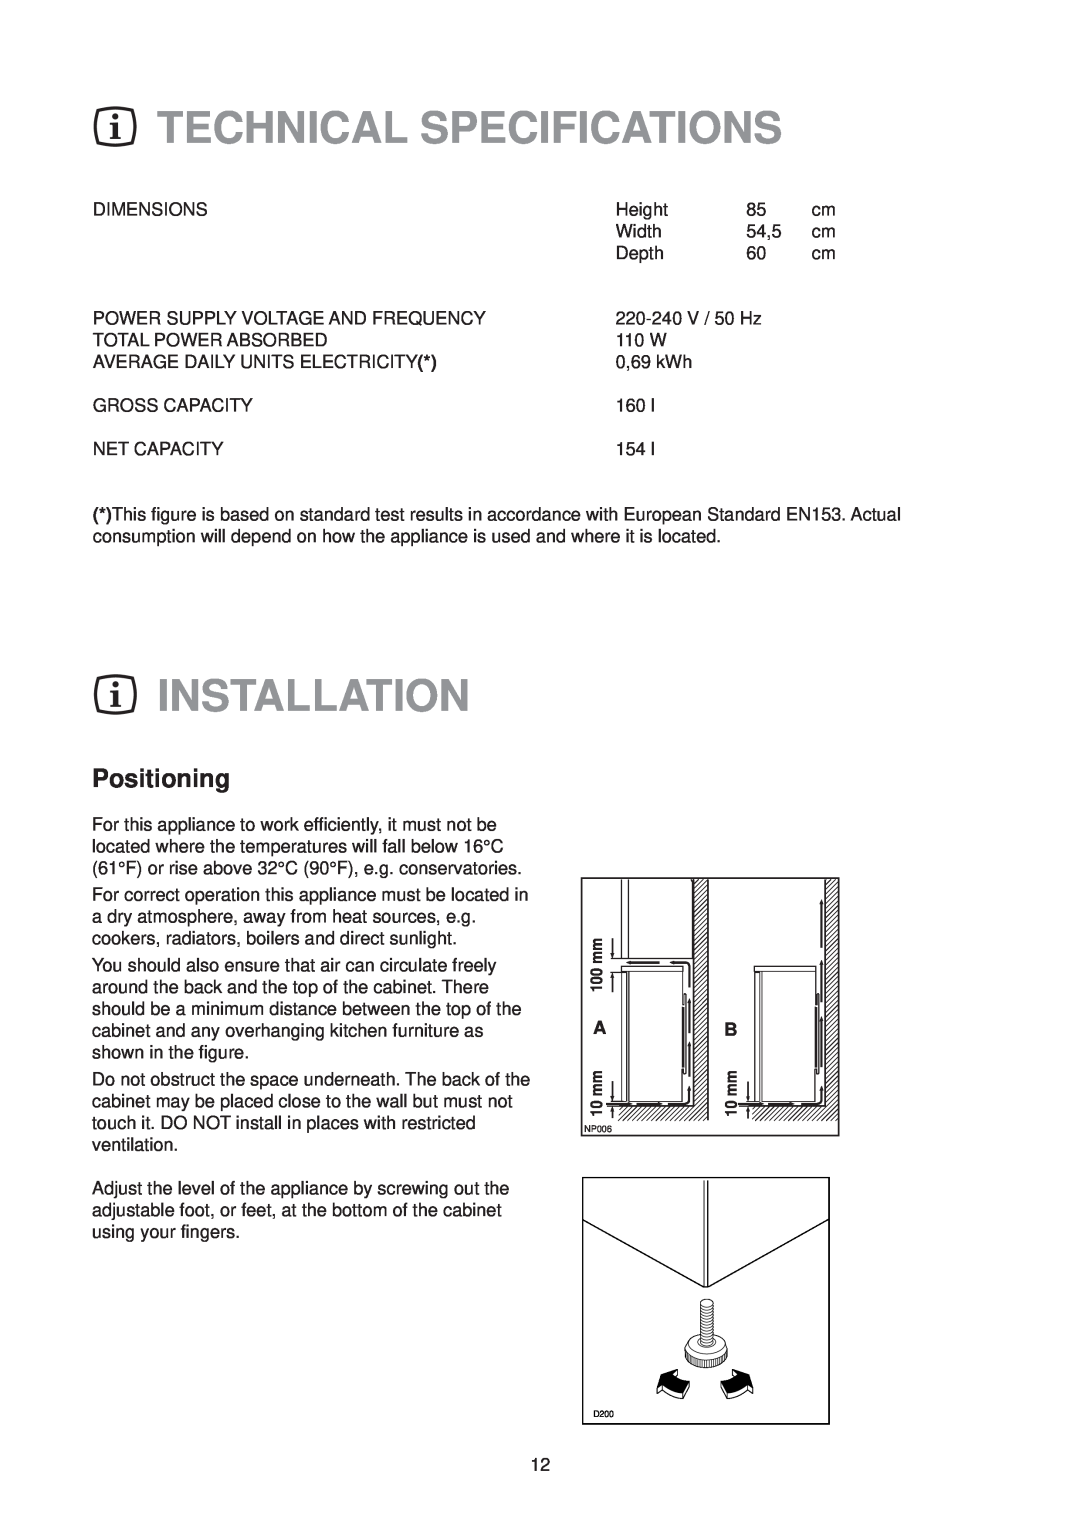 Zanussi ZT 56 RL manual Technical Specifications, Installation, Positioning 